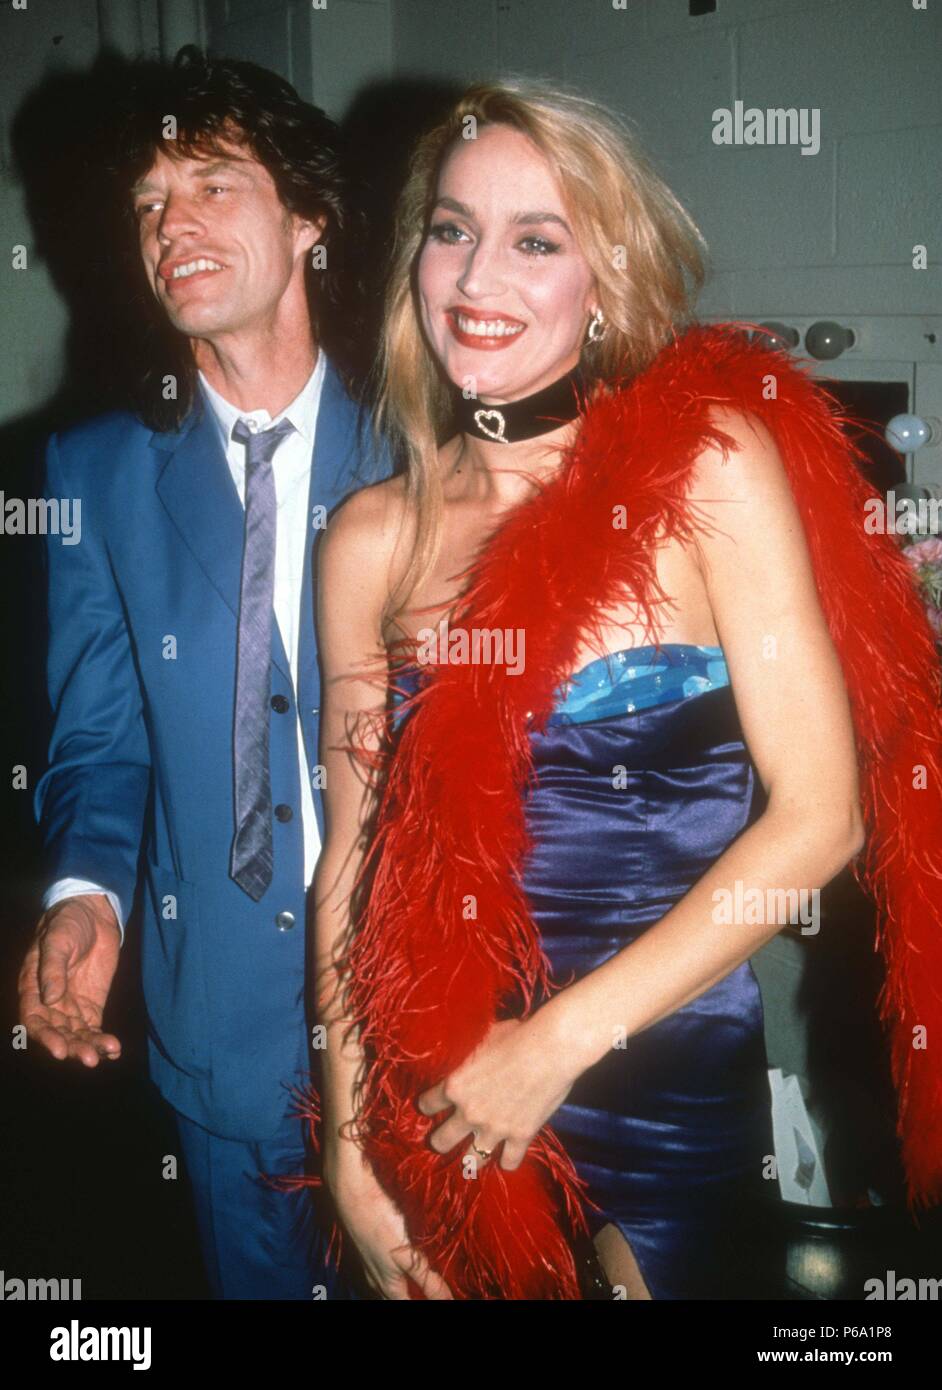 Mick Jagger Jerry Hall 1992 Photo By Adam Scull/PHOTOlink.net / MediaPunch Stock Photo